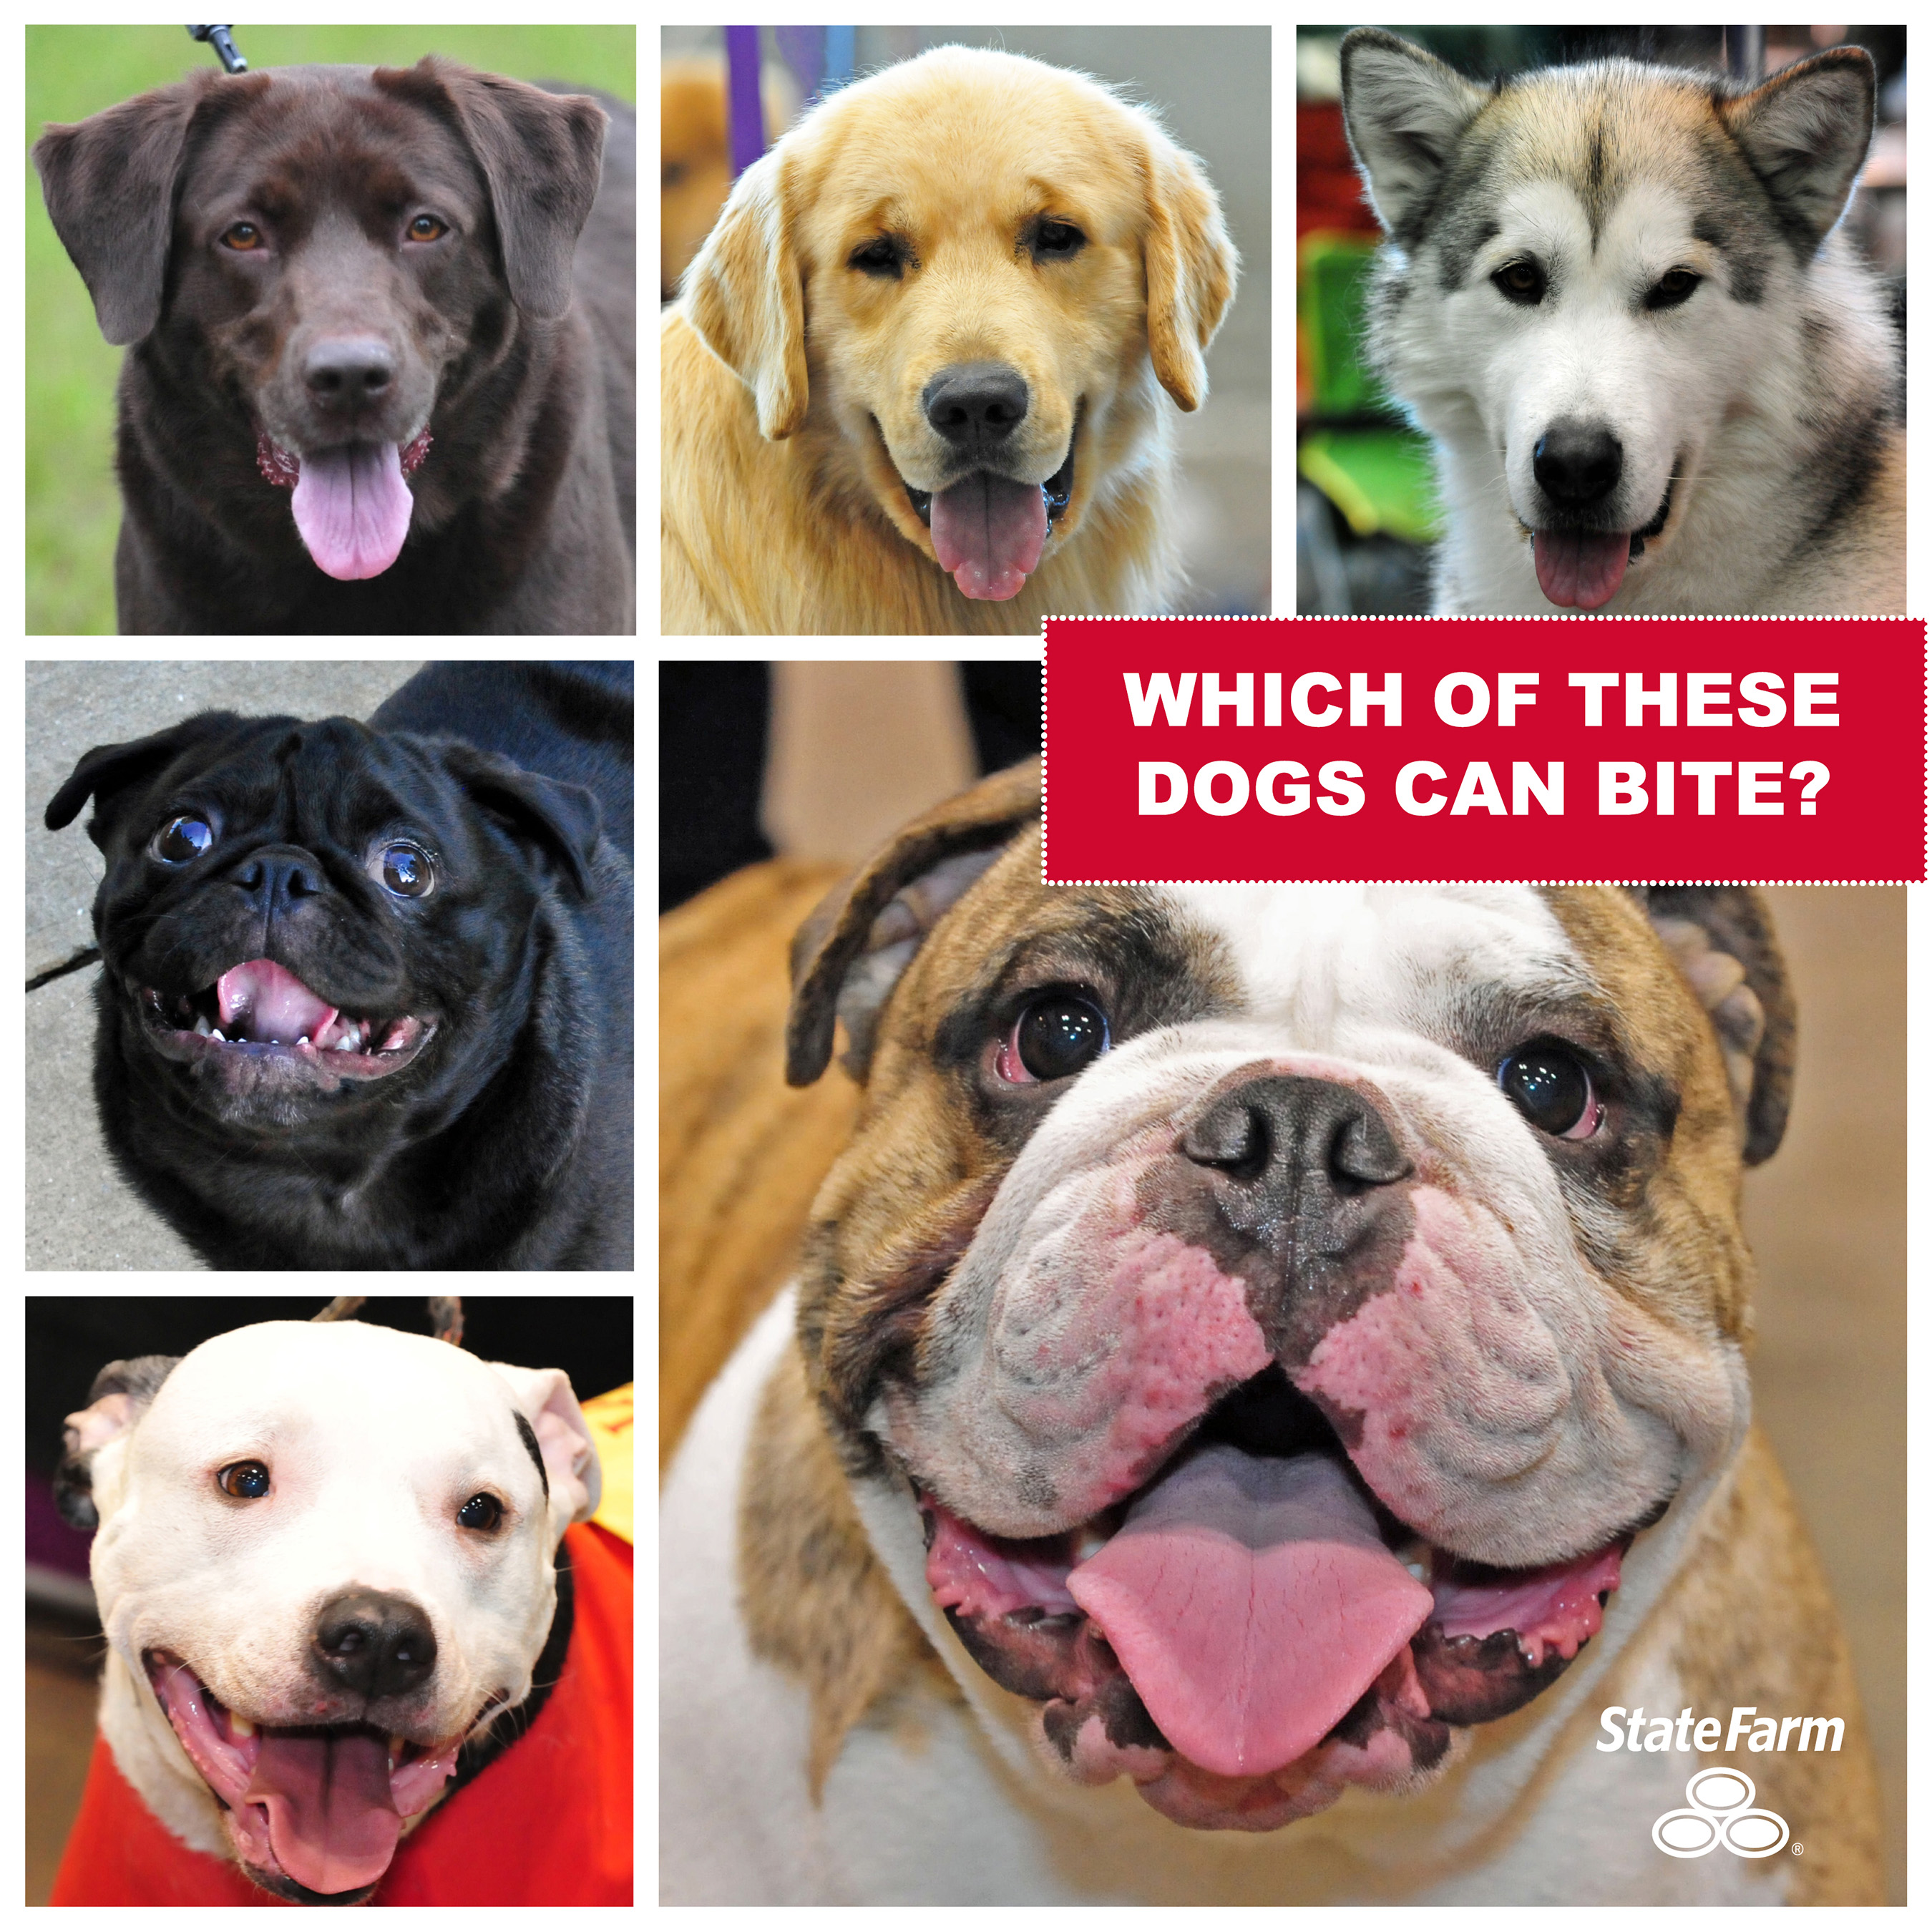 State Farm doesn’t ask what breed of dog is owned when writing homeowners insurance. Education about responsible dog ownership and teaching children how to approach dogs will reduce dog bite incidents.